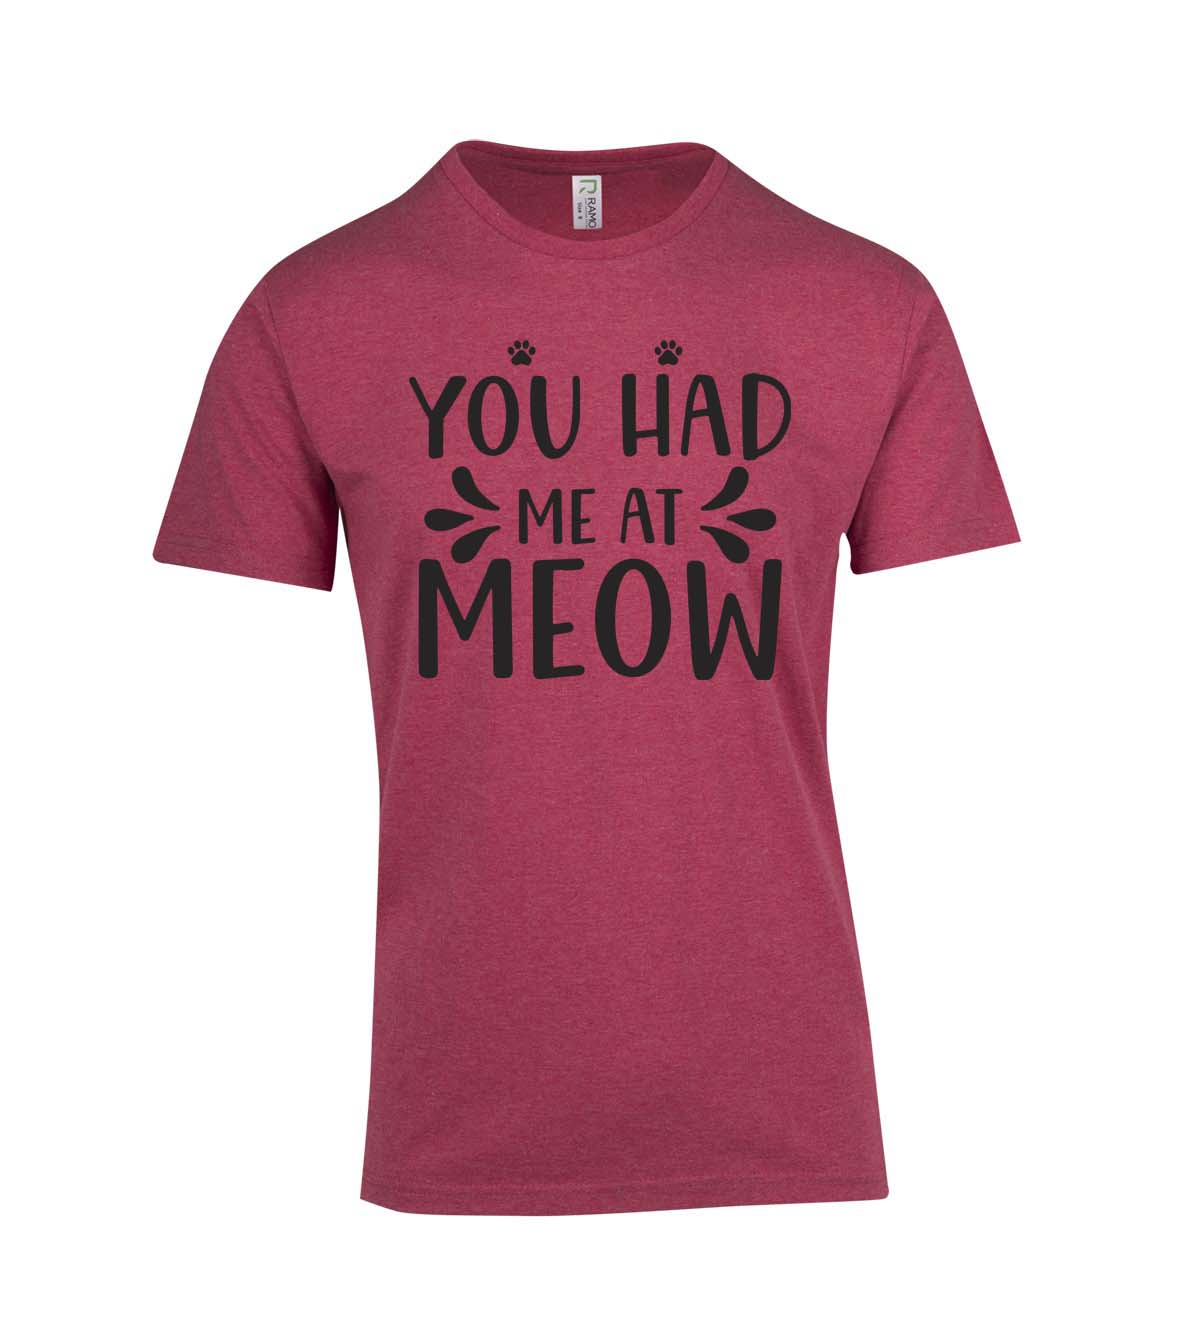 Perth Animal Rescue Double Sided Marl T-shirt - you had me at meow